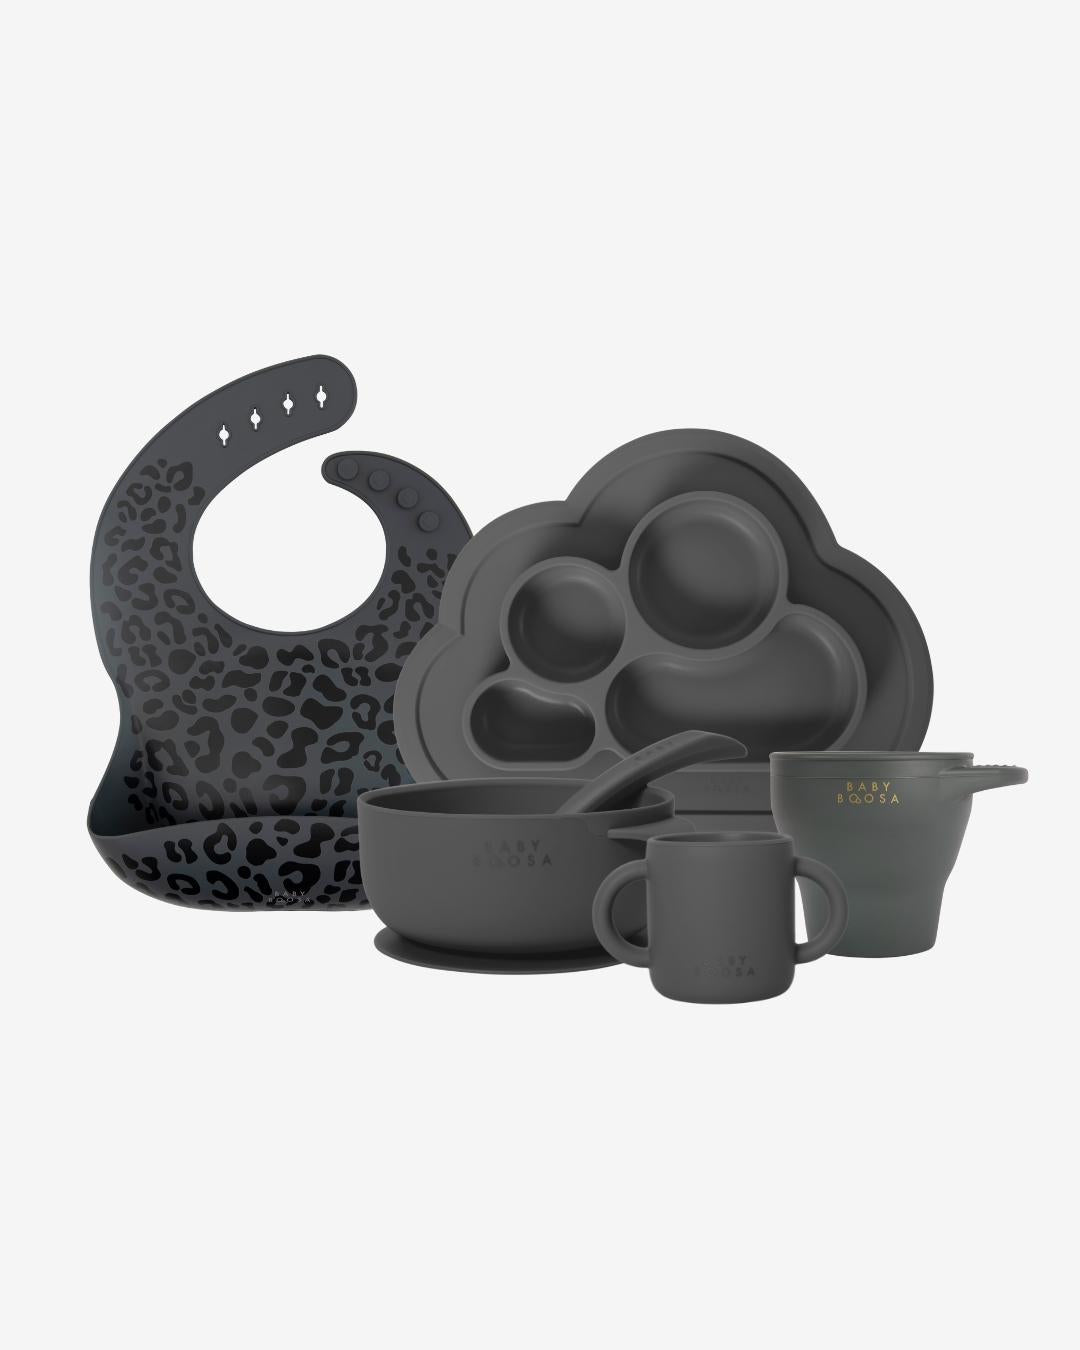 Weaning Gift Set | Luxe Silicone | All you need Essentials | Mess-Free | Grippy non-slip suction | Easy Clean | Dentist Developed (Charcoal Grey) - £84 Value